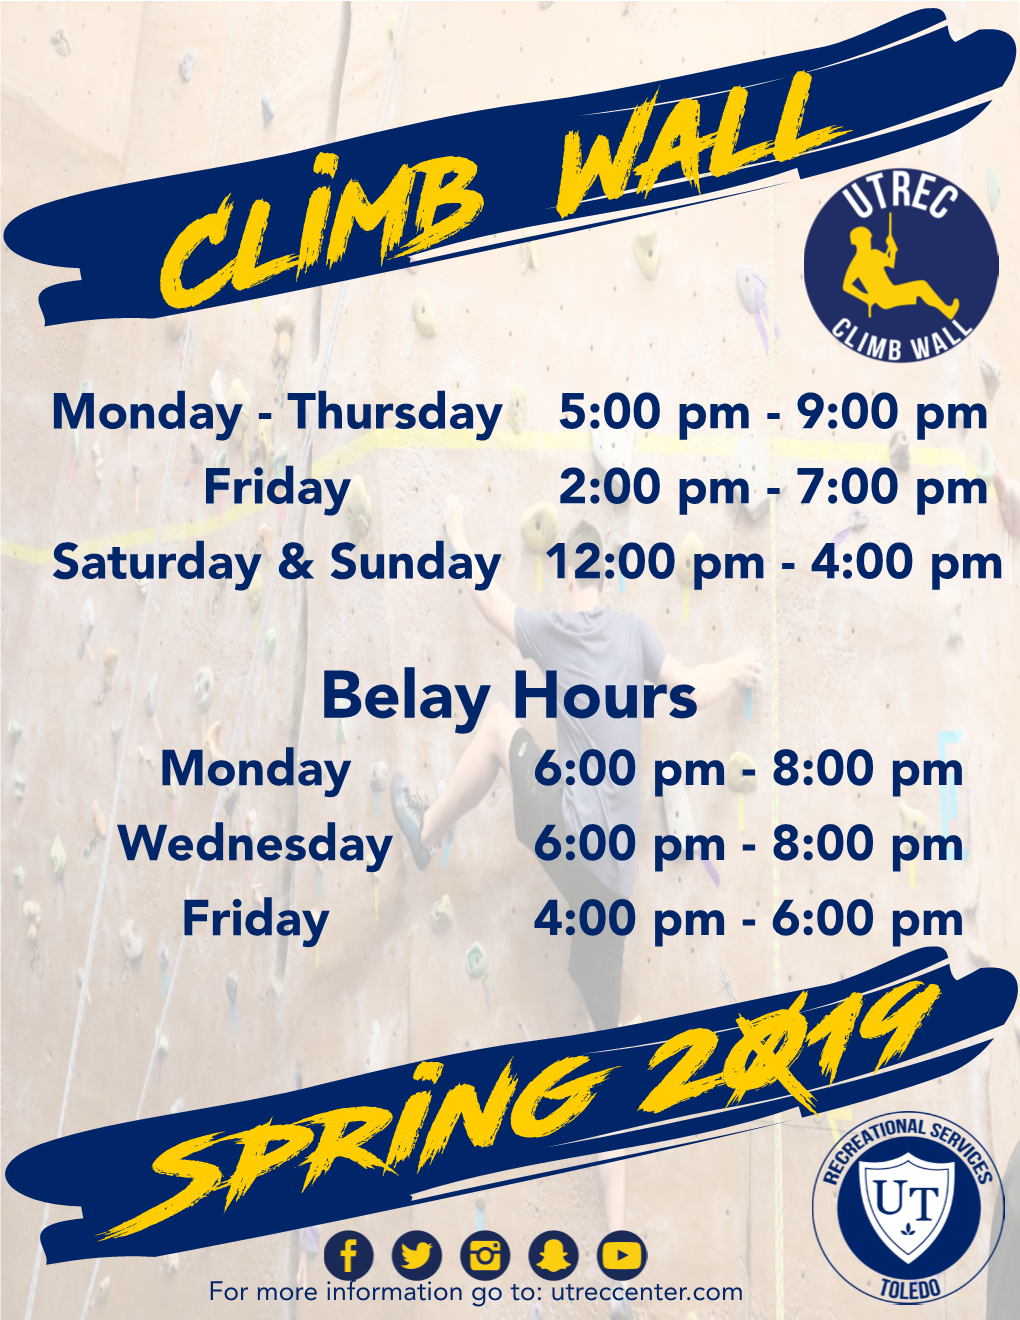 Belay Hours Monday 6:00 Pm - 8:00 Pm Wednesday 6:00 Pm - 8:00 Pm Friday 4:00 Pm - 6:00 Pm